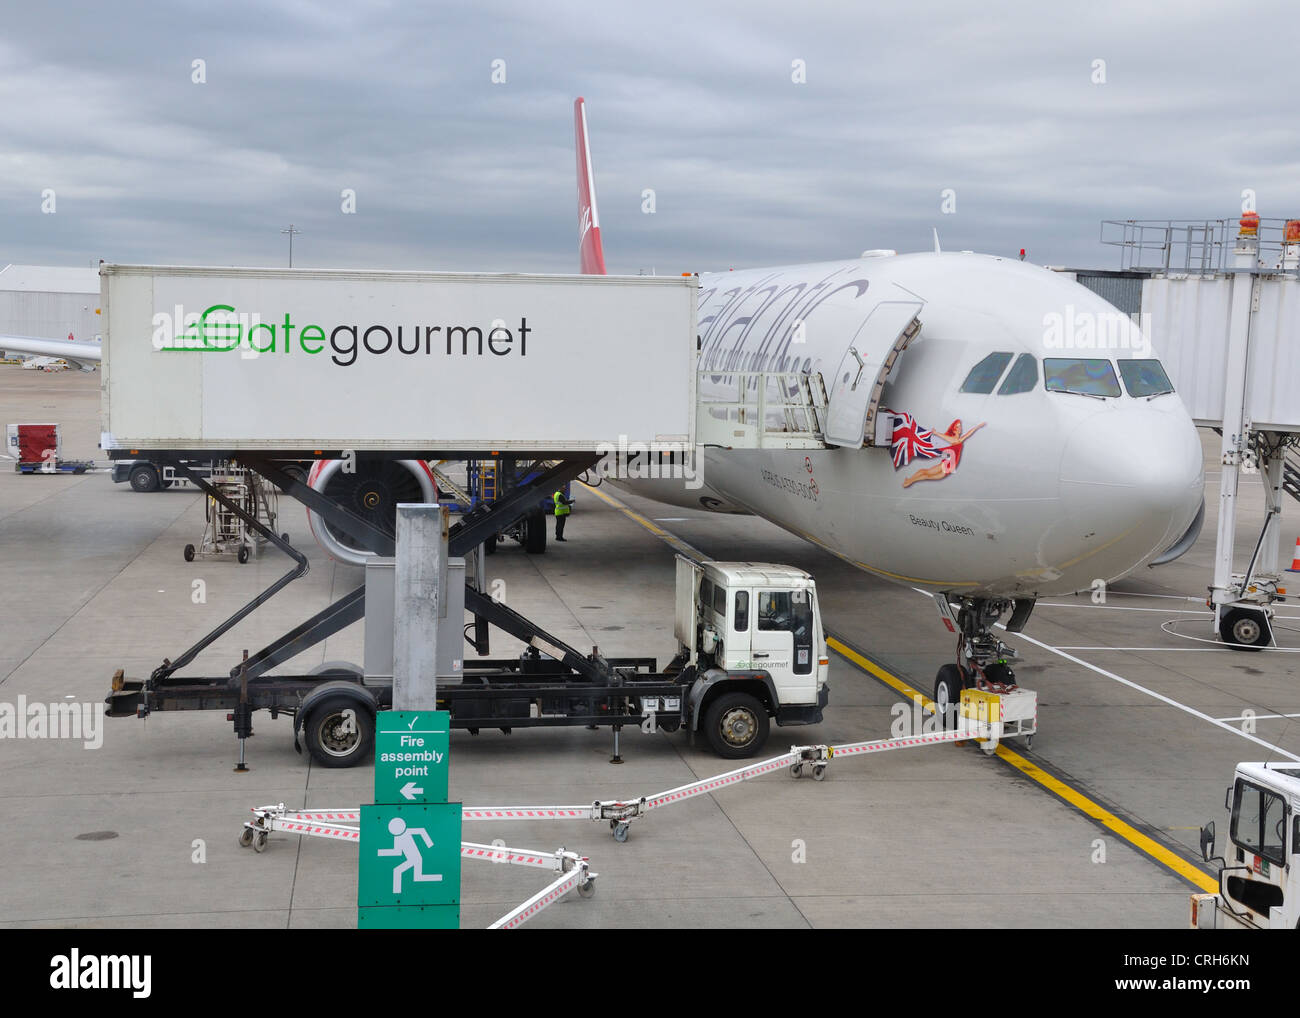 A Virgin Atlantic aircraft receives service from Gate gourmet at Glasgow airport. Stock Photo